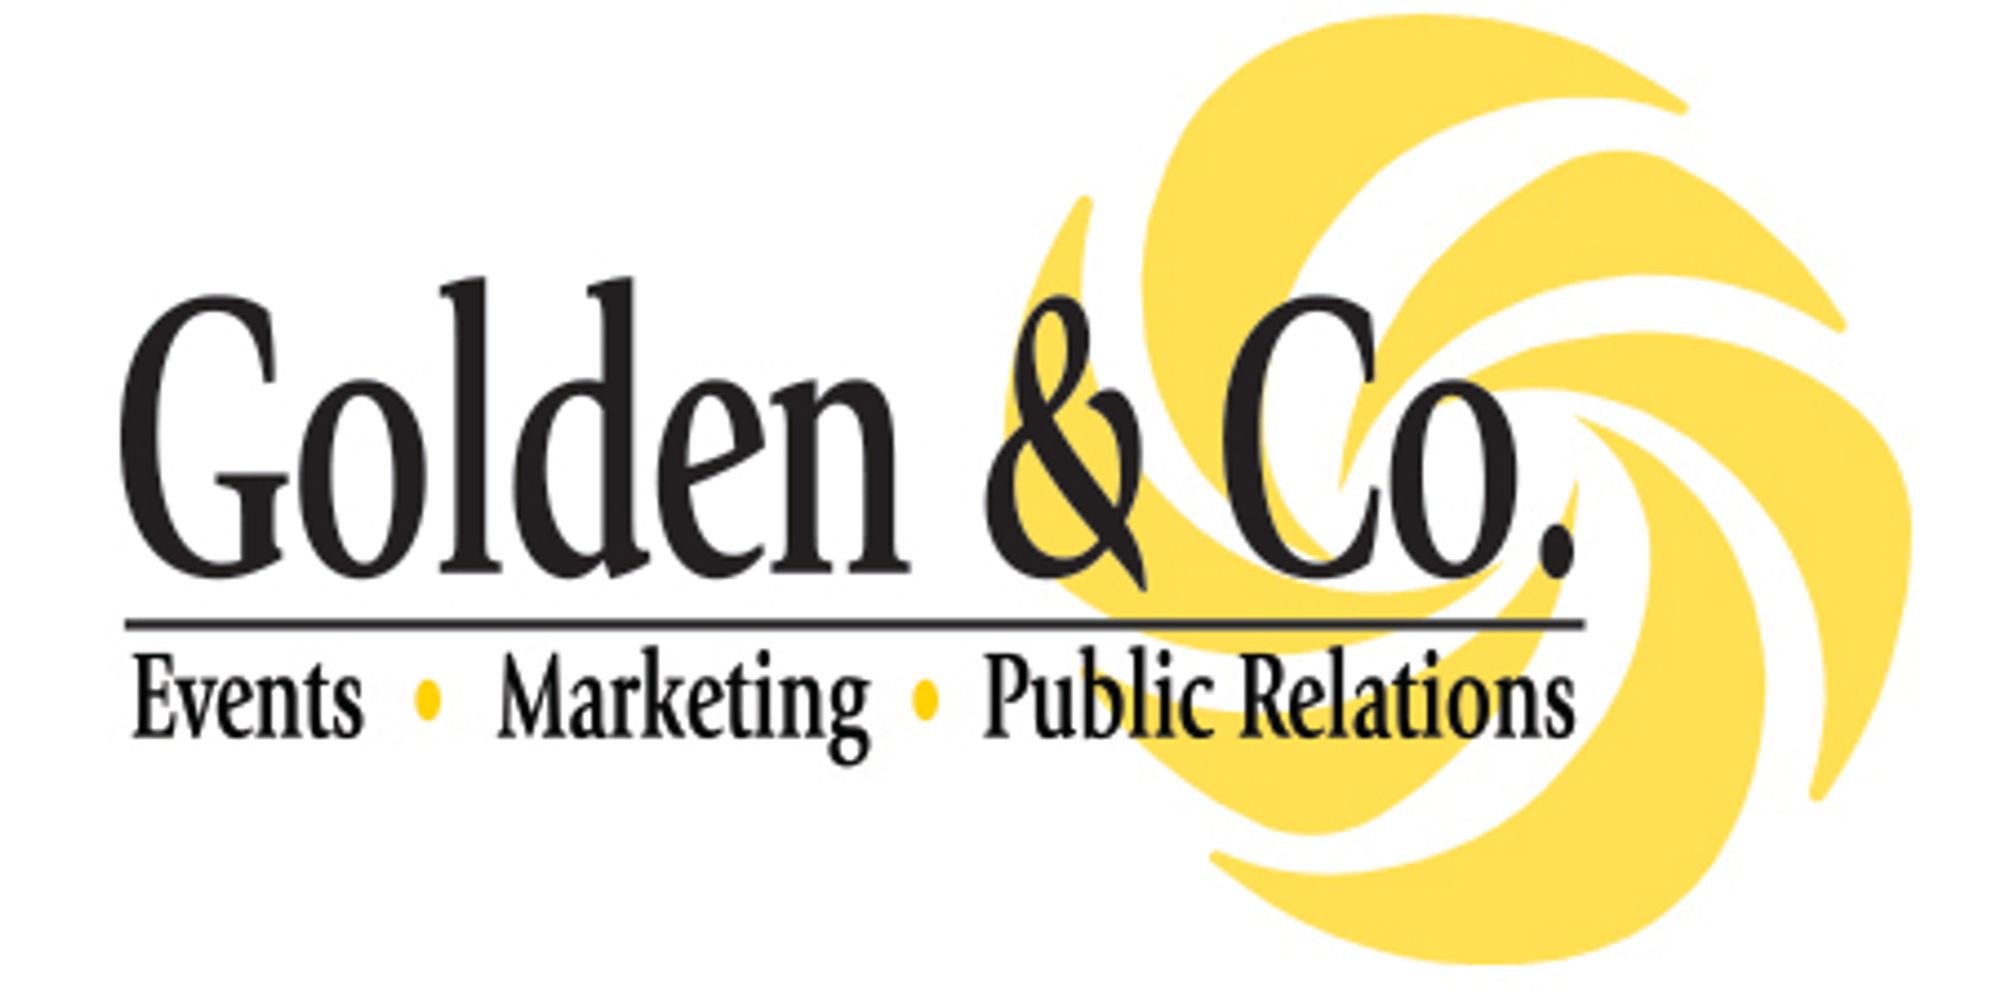 Public Relations Marketing Firm